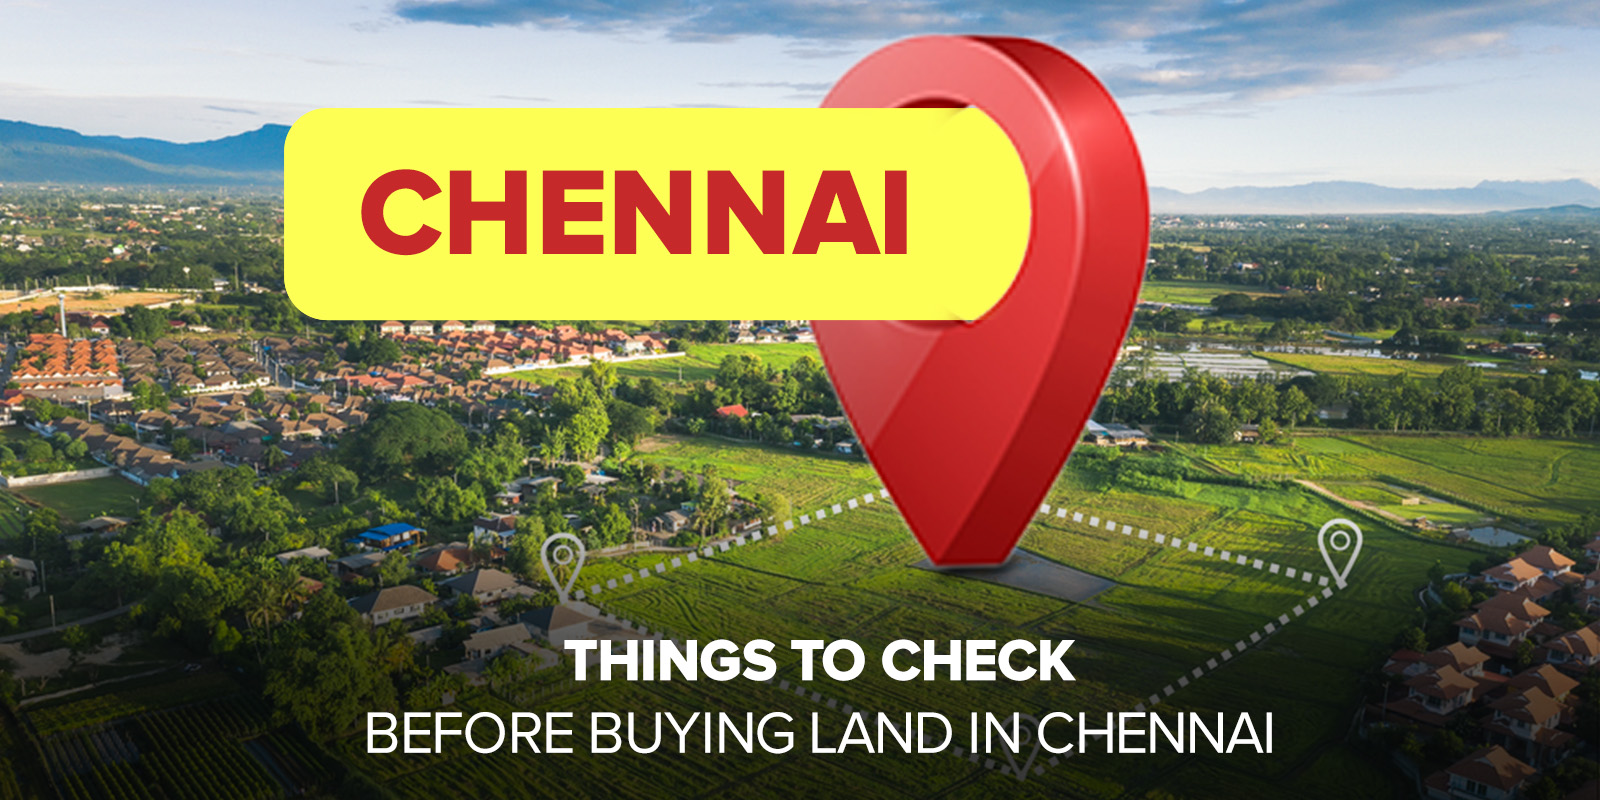 Things to Check before Buying Land in Chennai